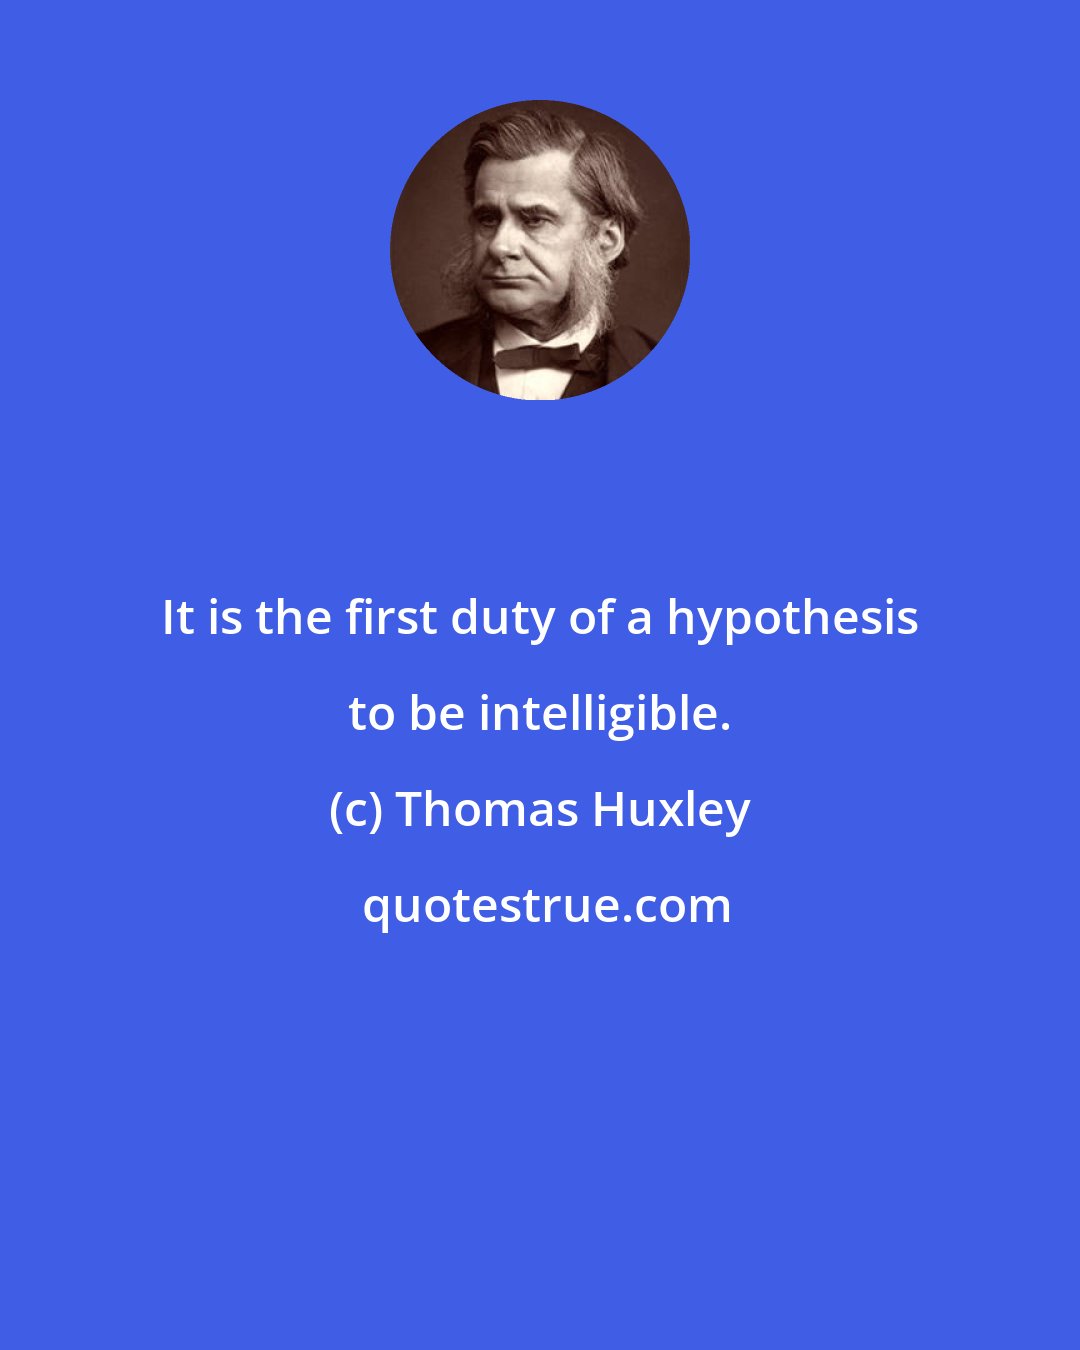 Thomas Huxley: It is the first duty of a hypothesis to be intelligible.